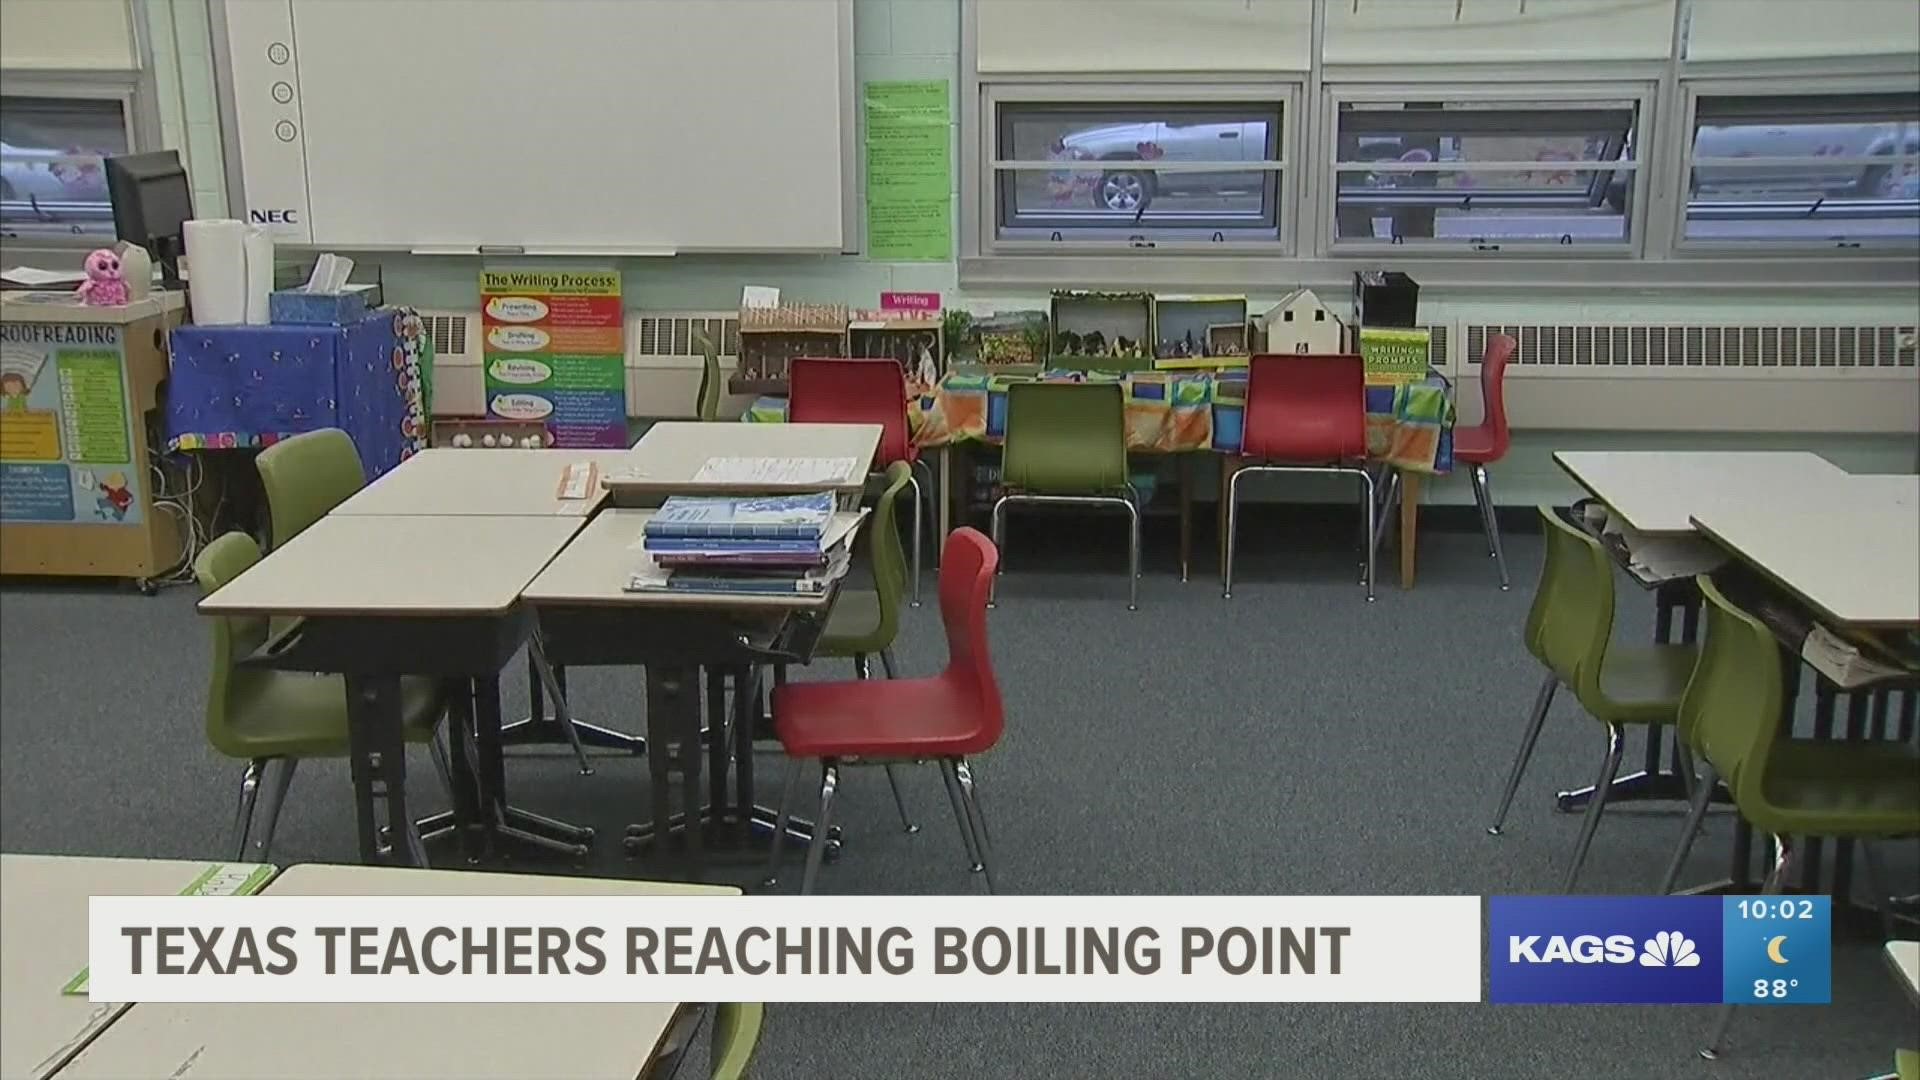 The Texas public education system is making headlines for the wrong reasons after a survey found that 70% of teachers are considering quitting within the year.